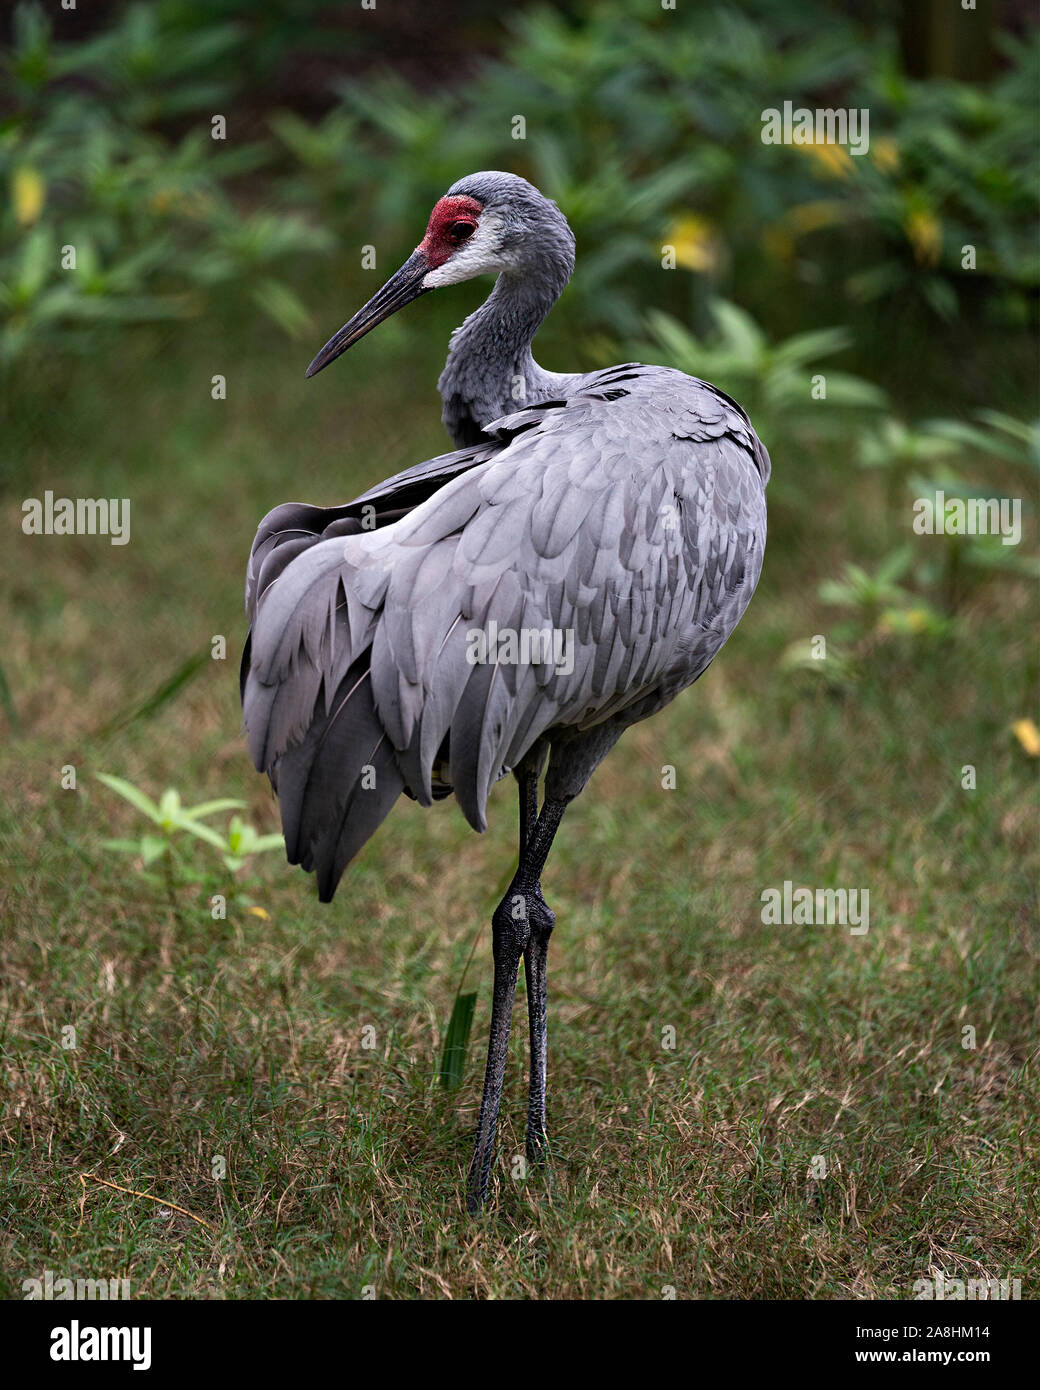 Sandhill Crane bird standing tall with a nice foliage background enjoying its surrounding and environment while exposing its body, wings, head, long n Stock Photo